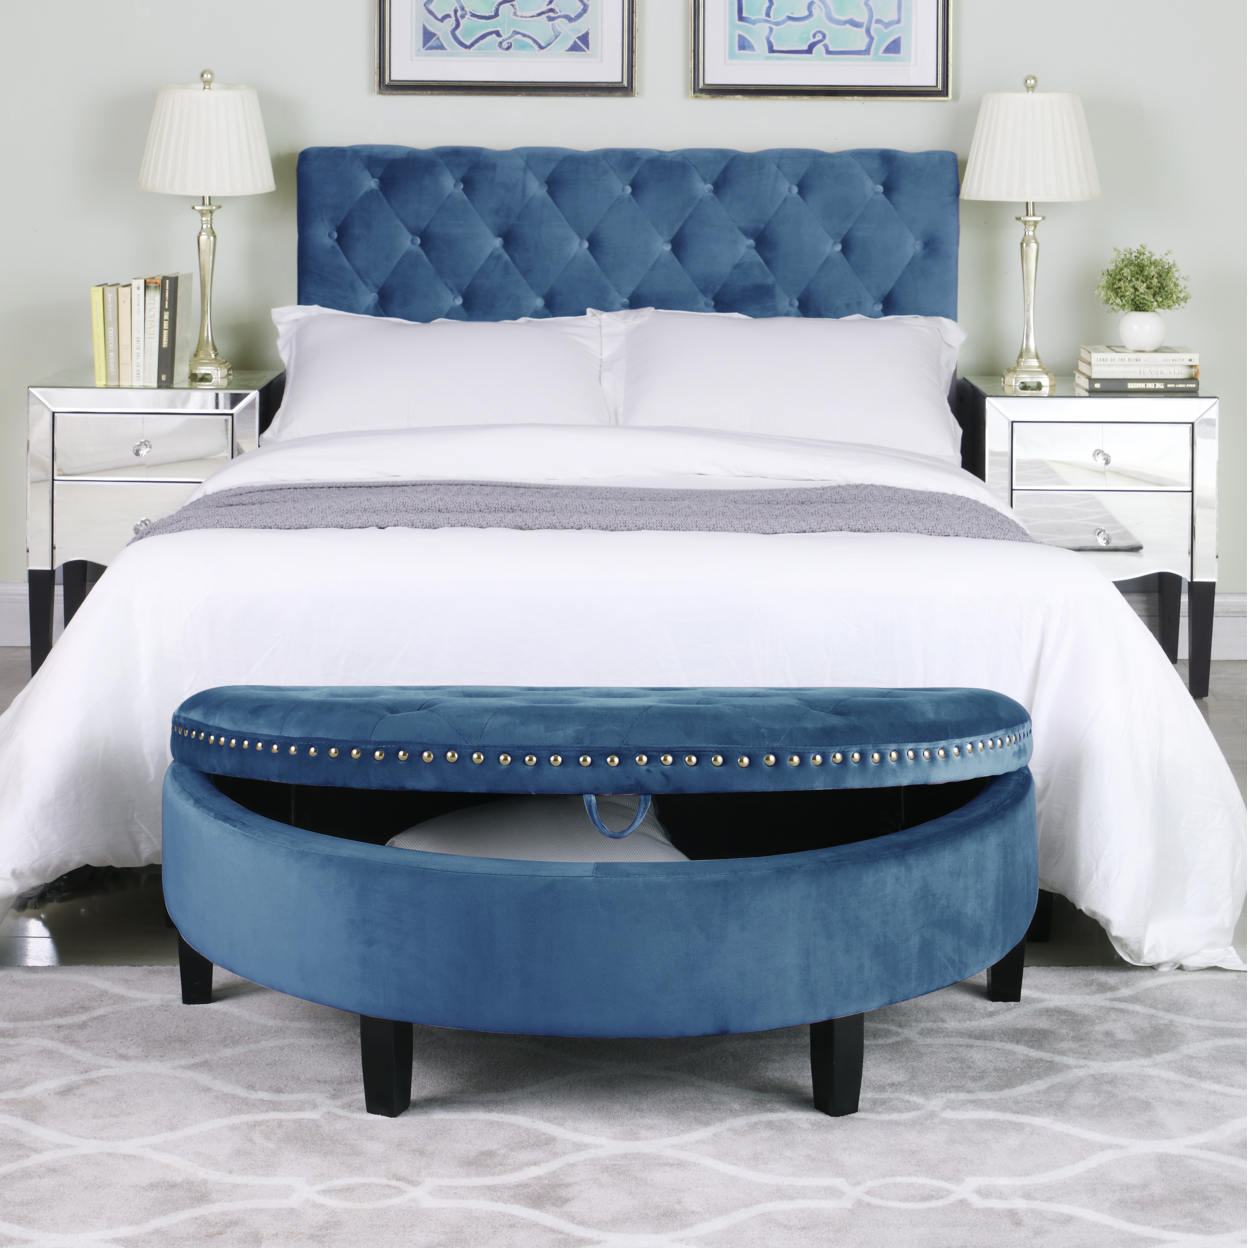 Sarah Half Moon Storage Ottoman Button Tufted Velvet Upholstered Gold Nailhead Trim Espresso Finished Wood Legs Bench - Teal